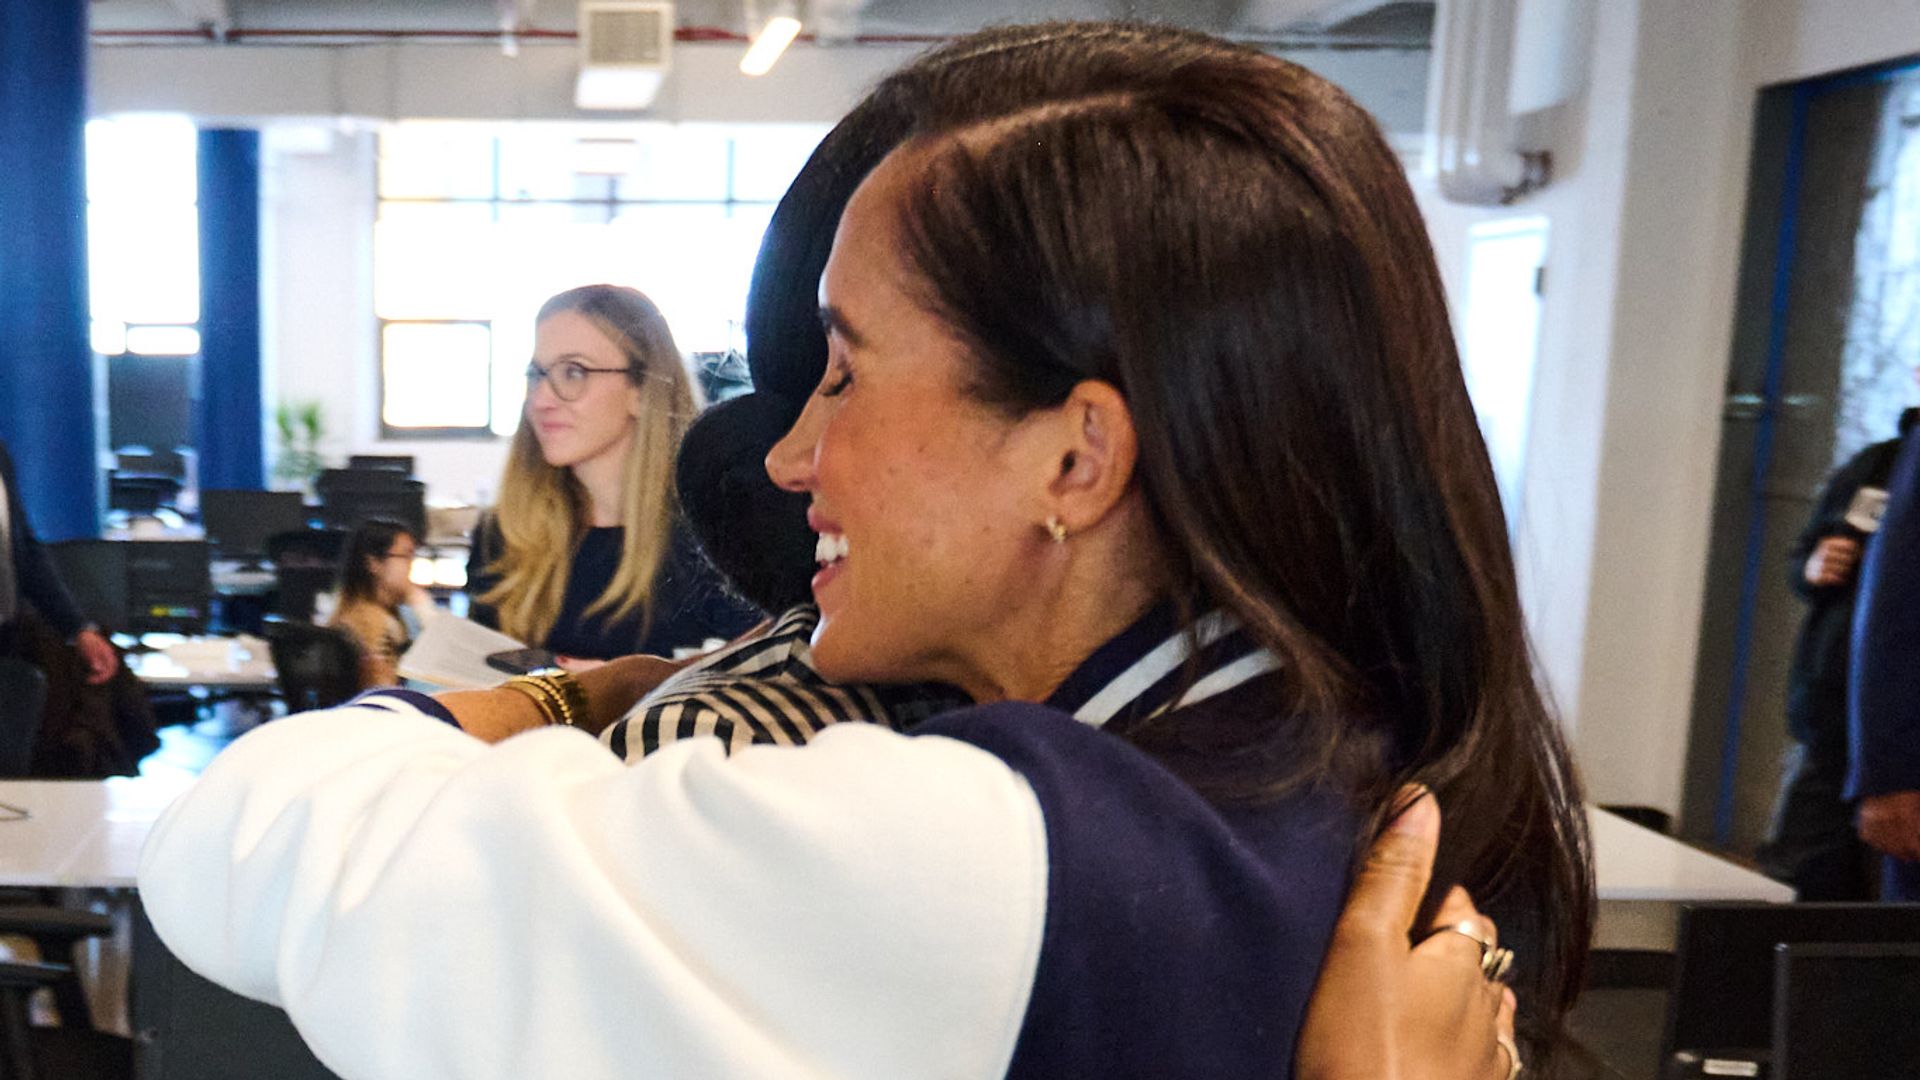 The Duchess of Sussex made the visit on World Mental Health Day